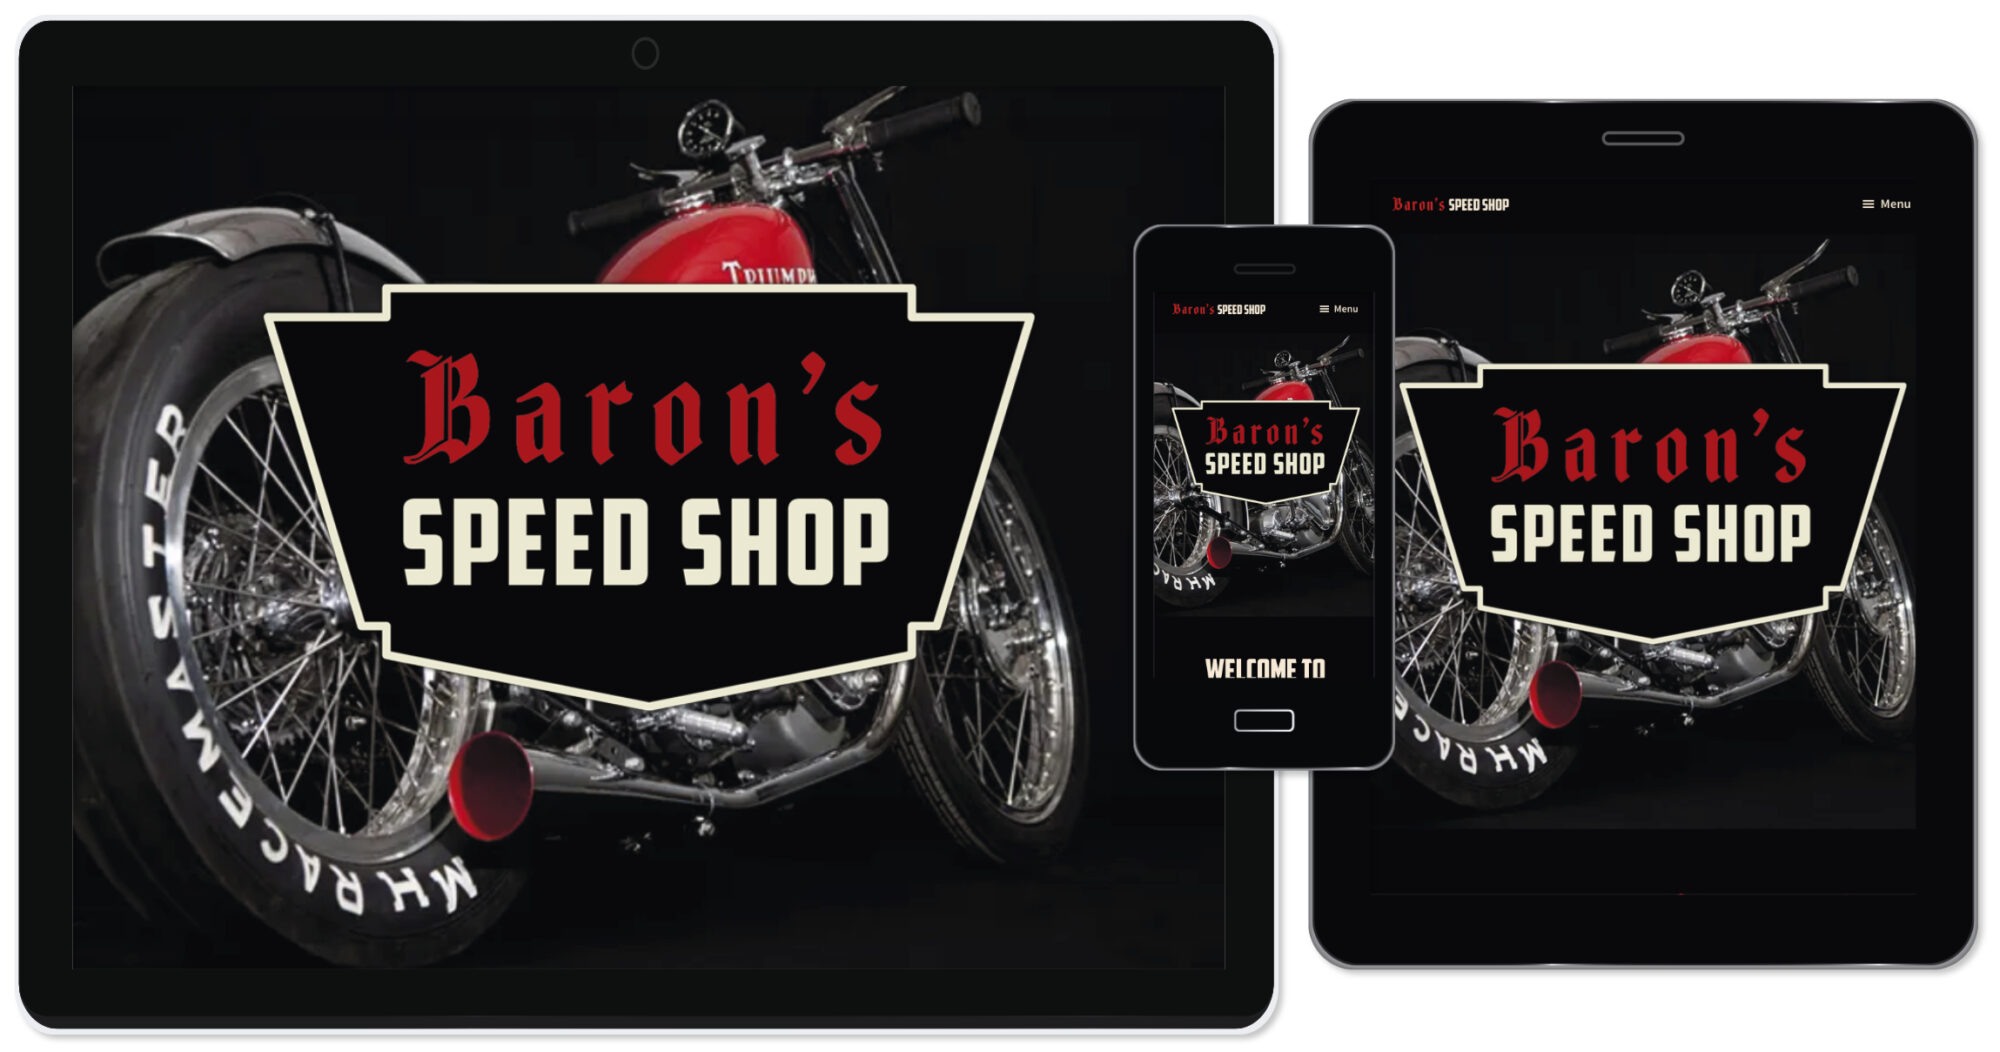 Baron's Speed Shop custom and classic motorcycles